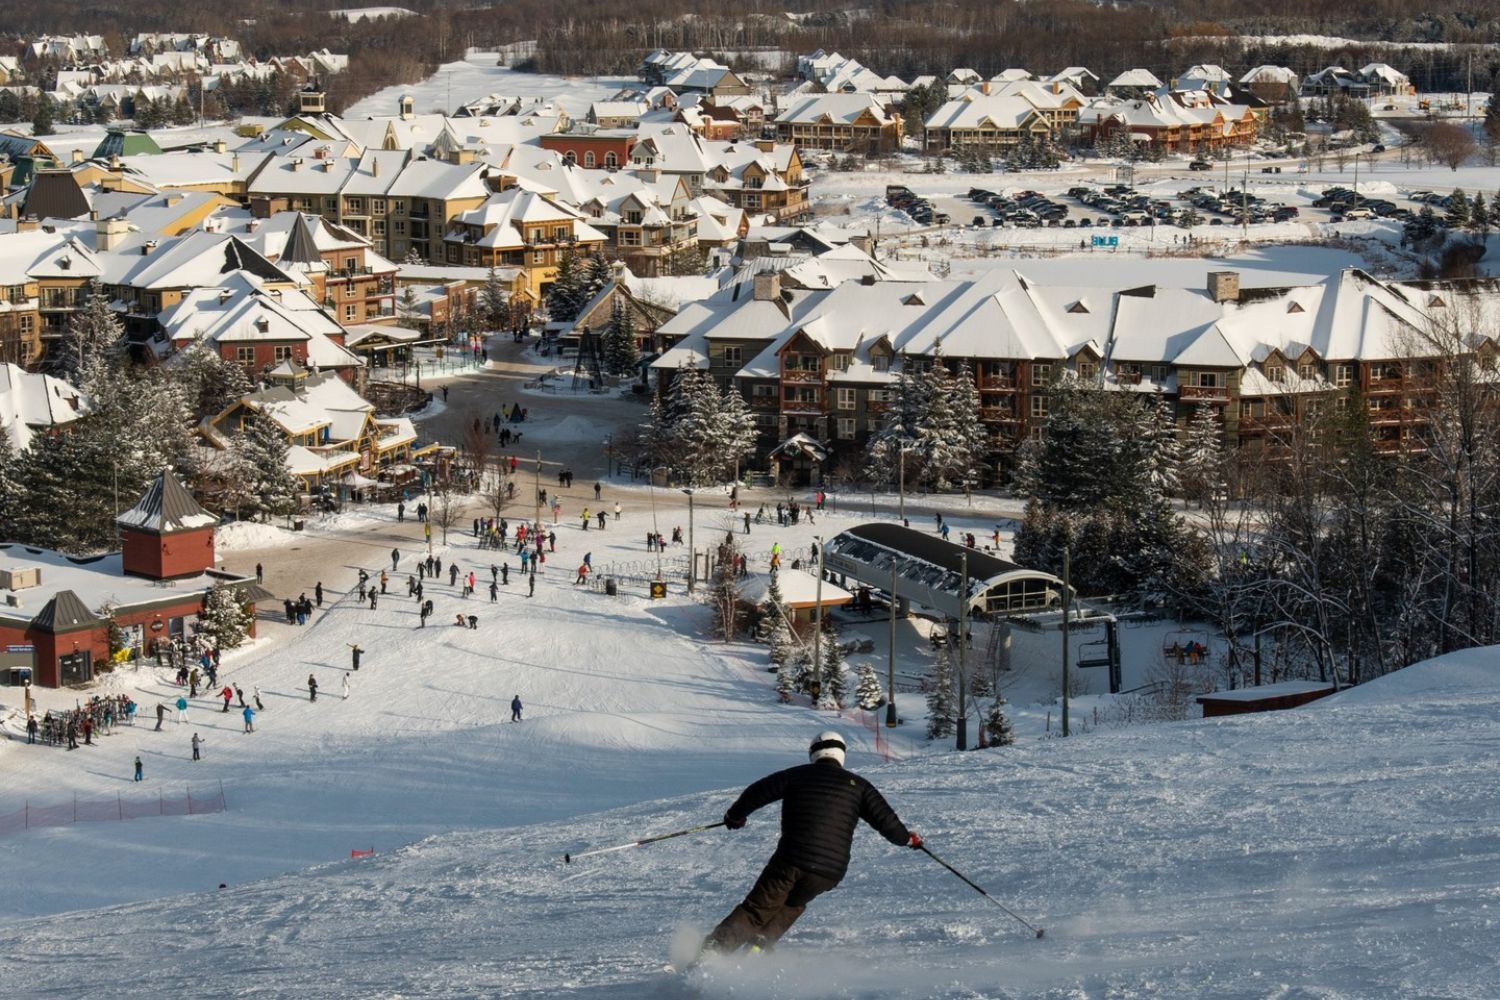 Air Canada Pop-Up at Blue Mountain is giving away 4 flight tickets